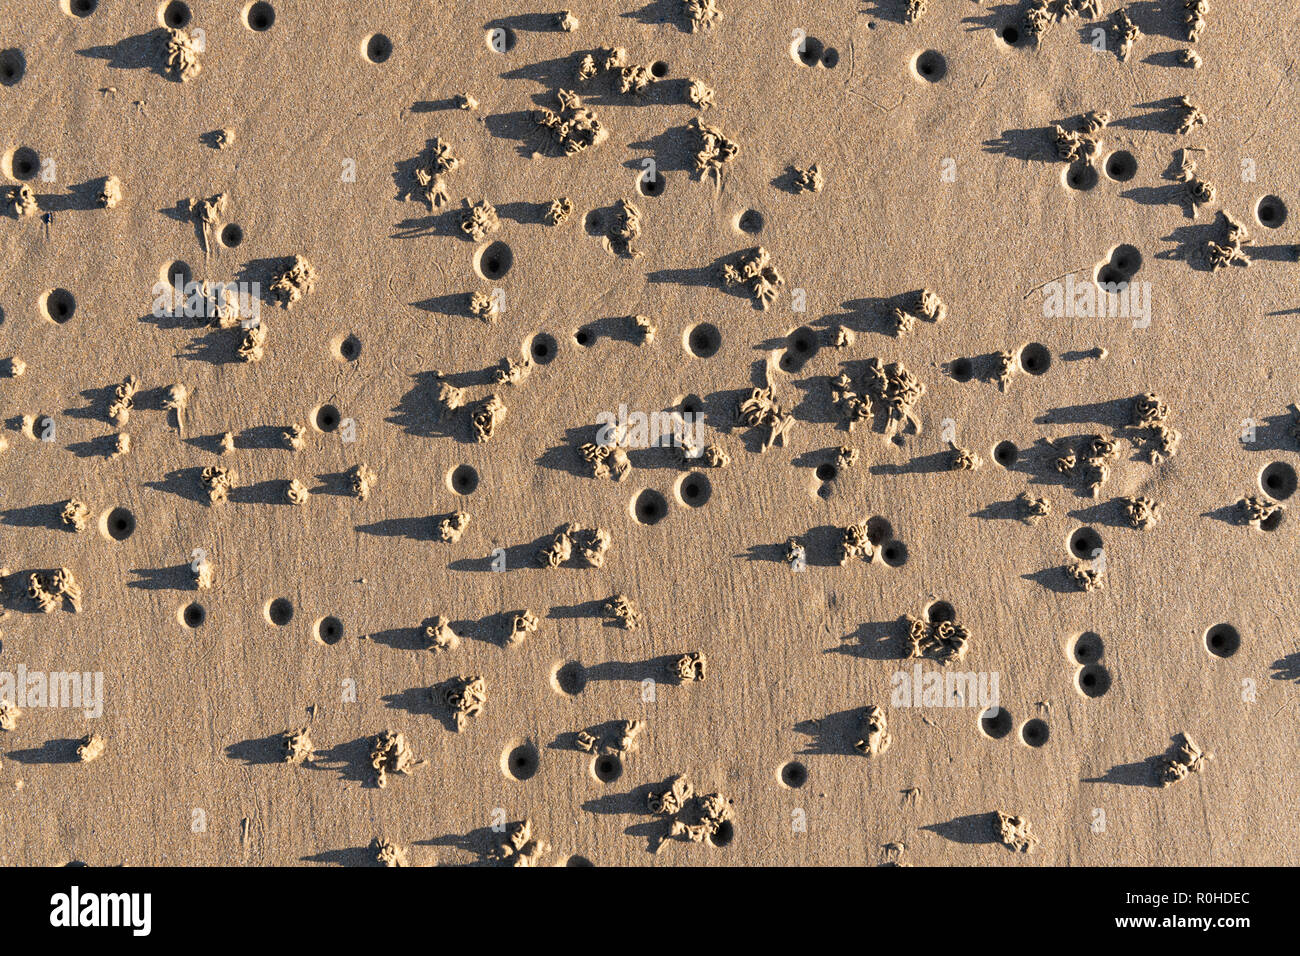 Lug worms creating a pattern of small holes and hills on the beach Stock Photo